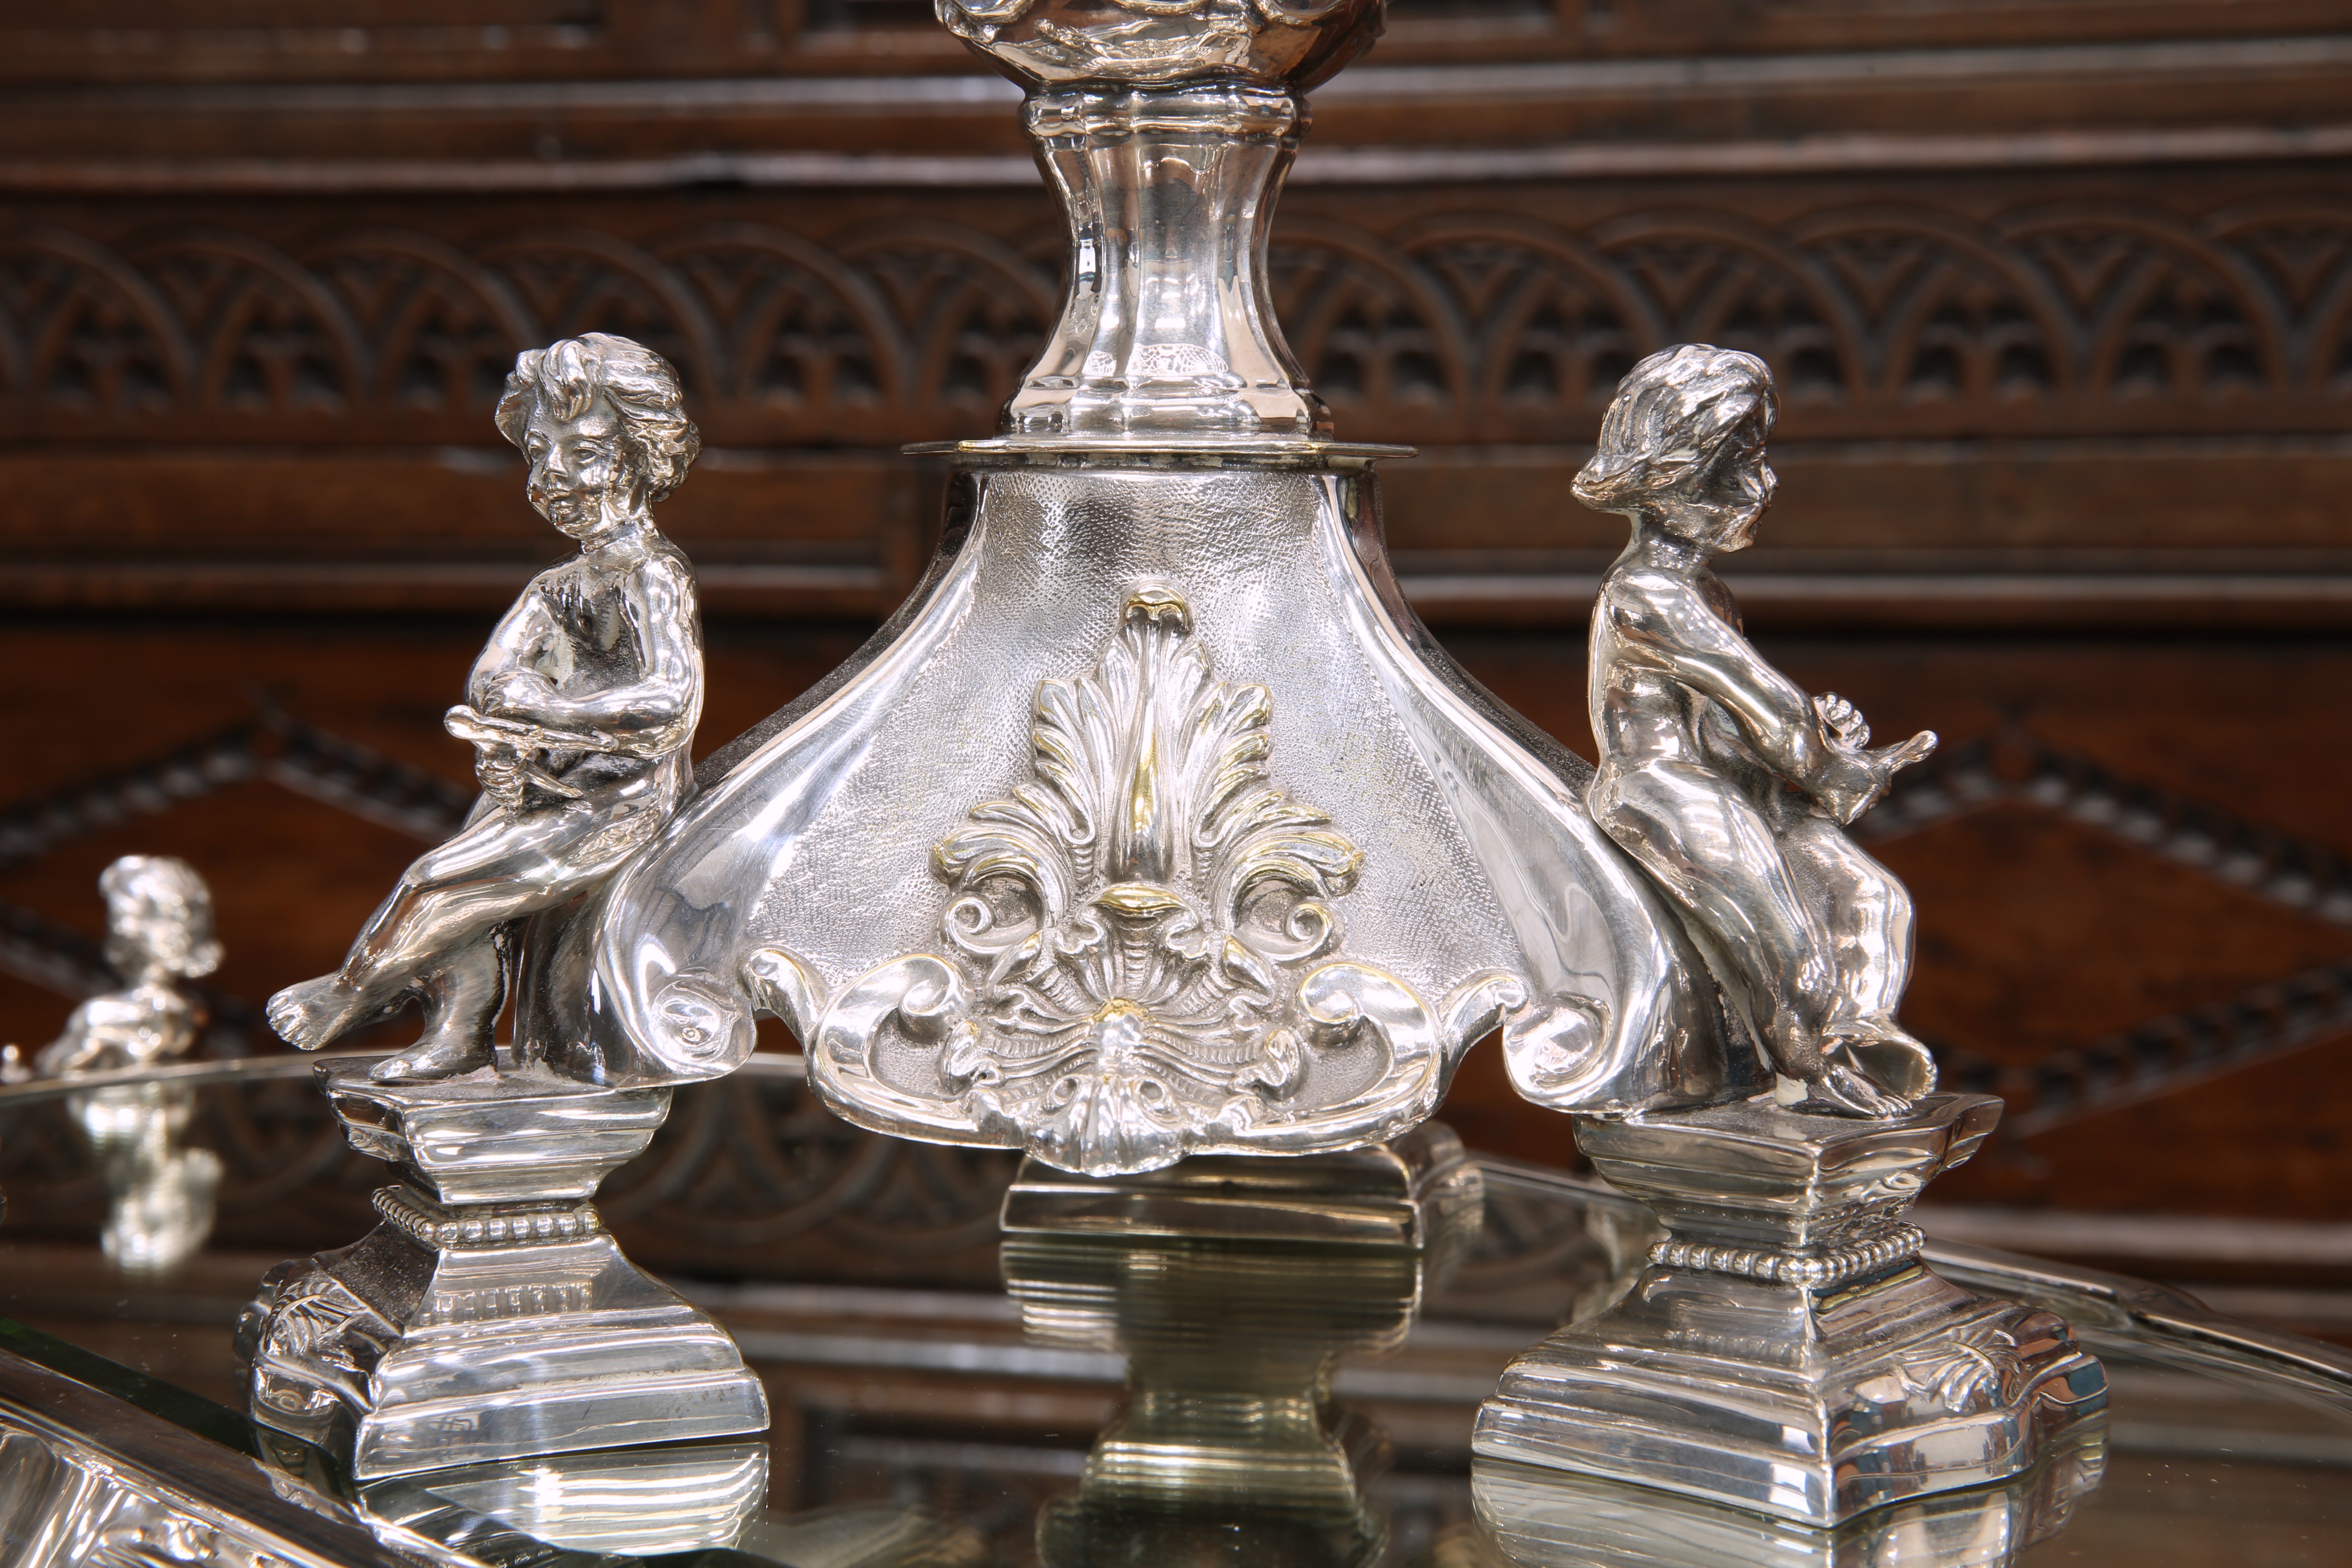 A HANDSOME PAIR OF 19TH CENTURY SILVER-PLATED CENTREPIECES - Image 5 of 7